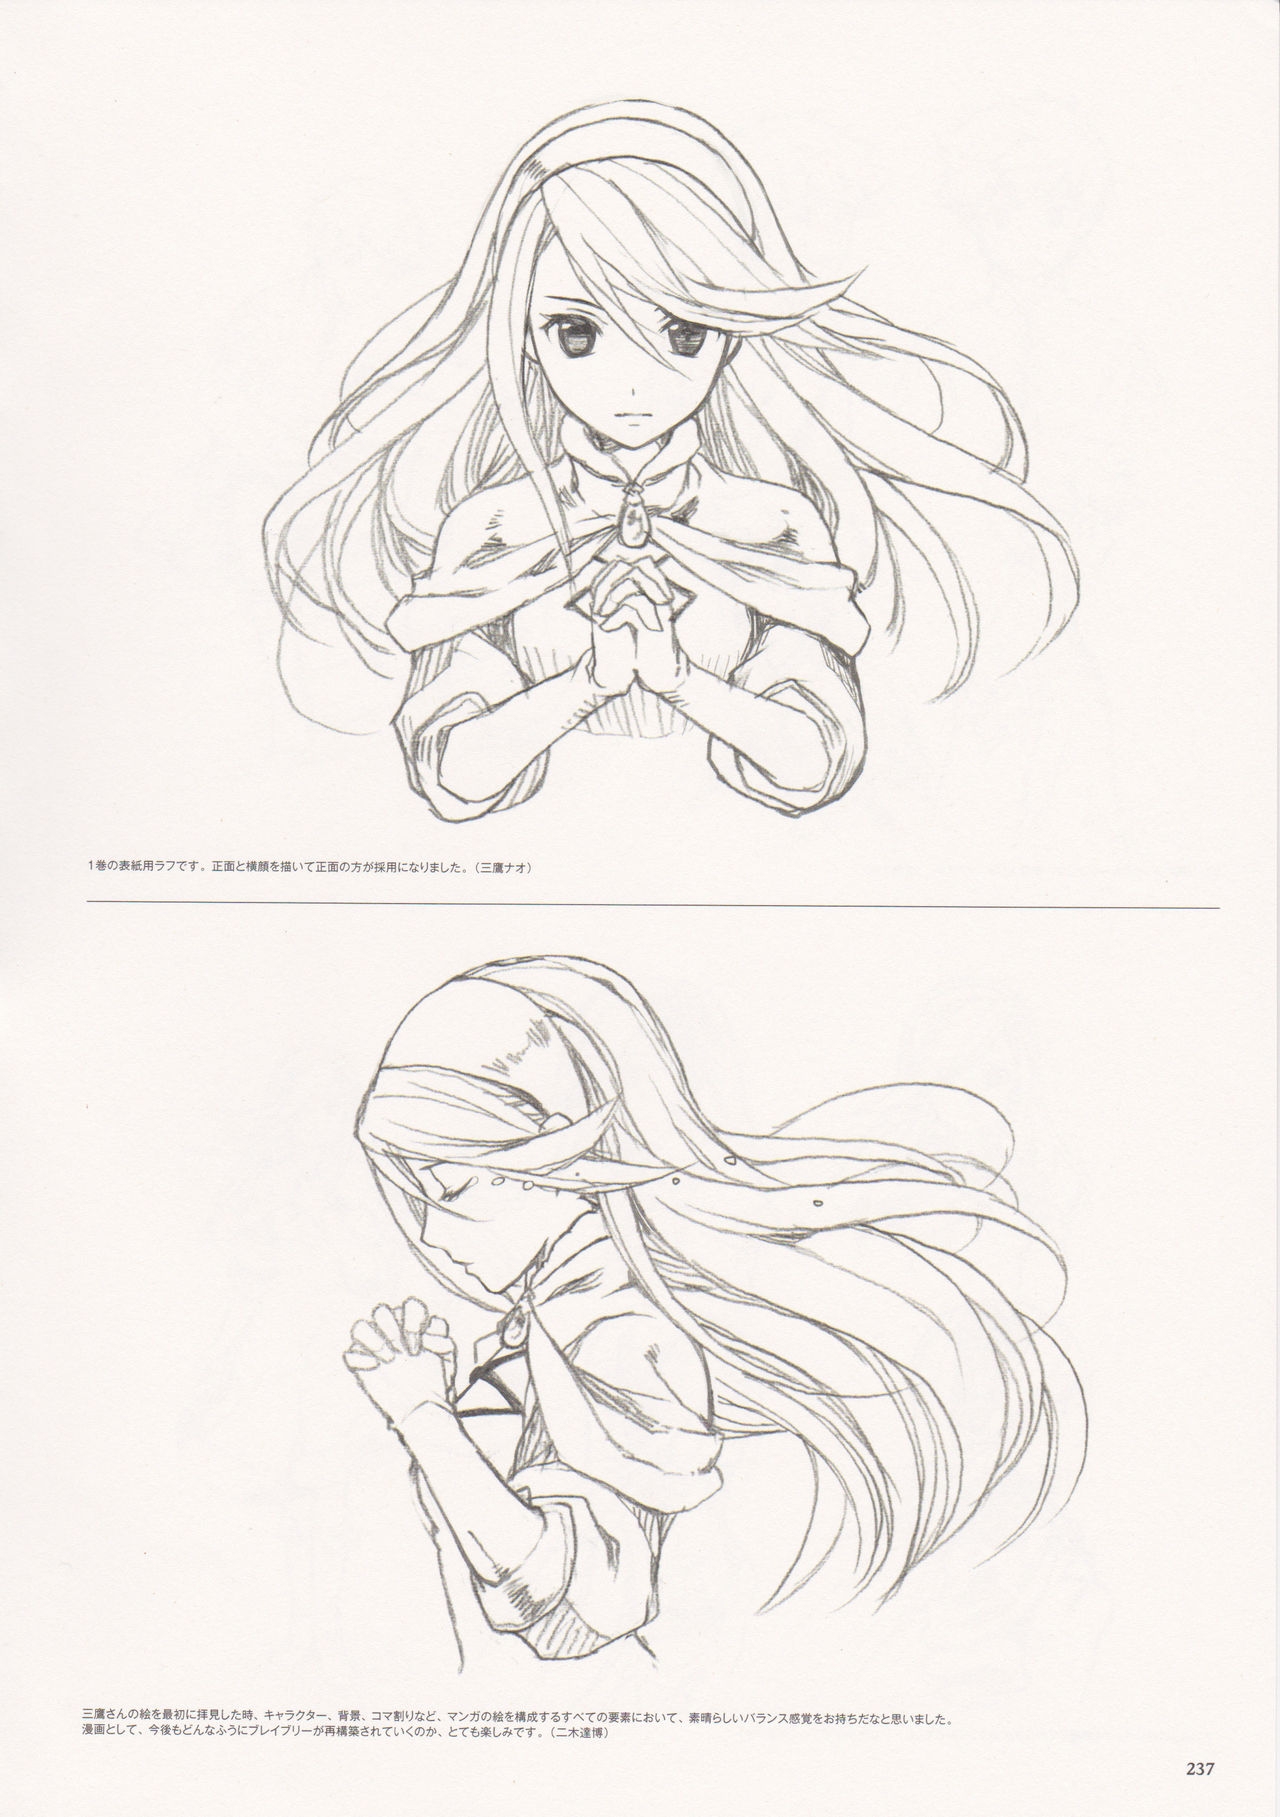 Bravely Second - End Layer - Design Works THE ART OF BRAVELY 2013-2015 236